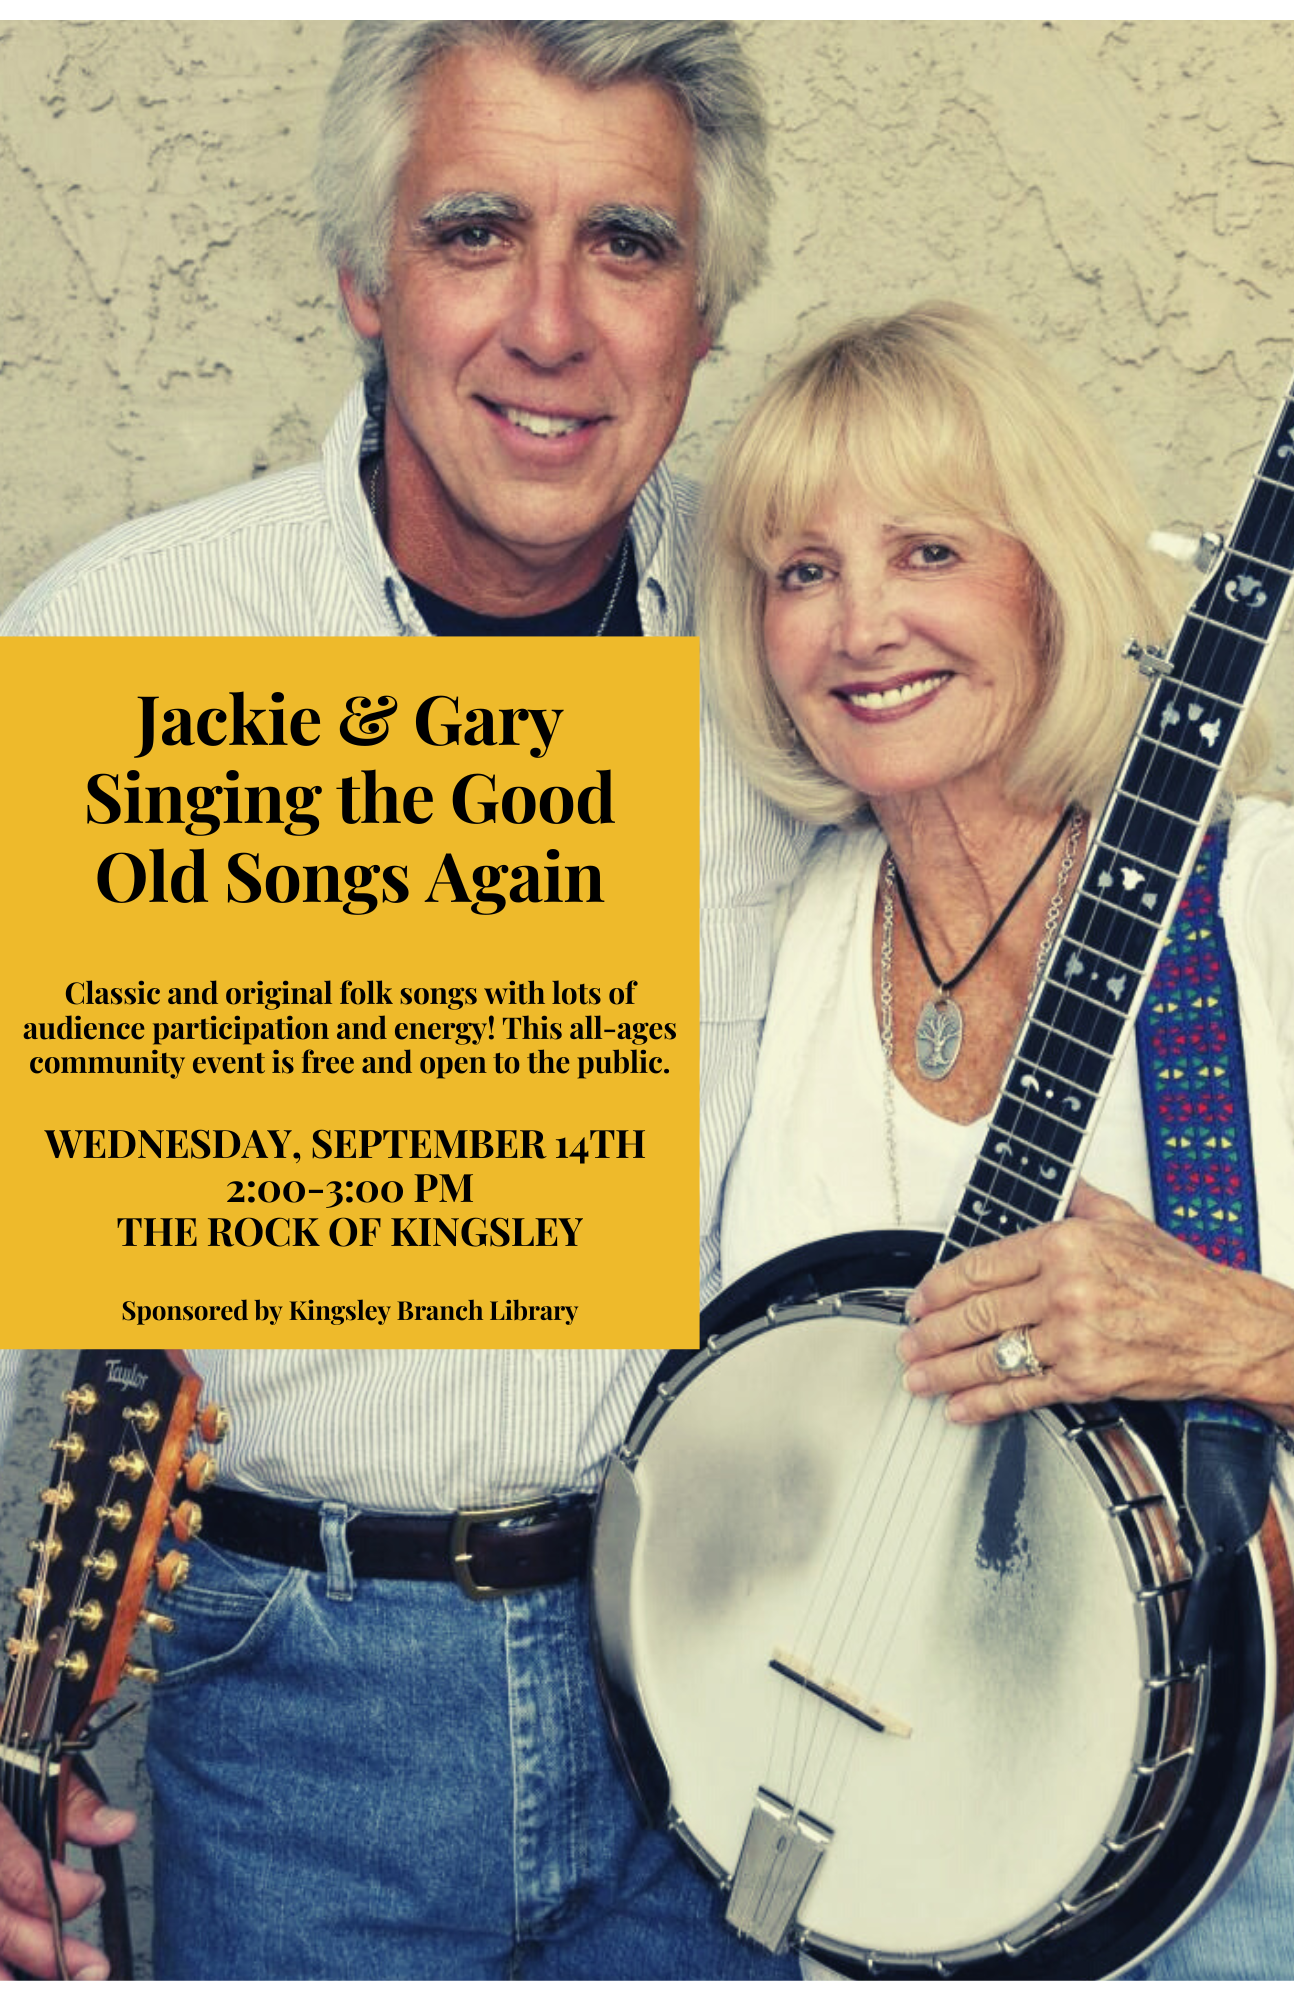 Image of two people holding a banjo and a guitar, text says Jackie and gary singing the good old songs again.